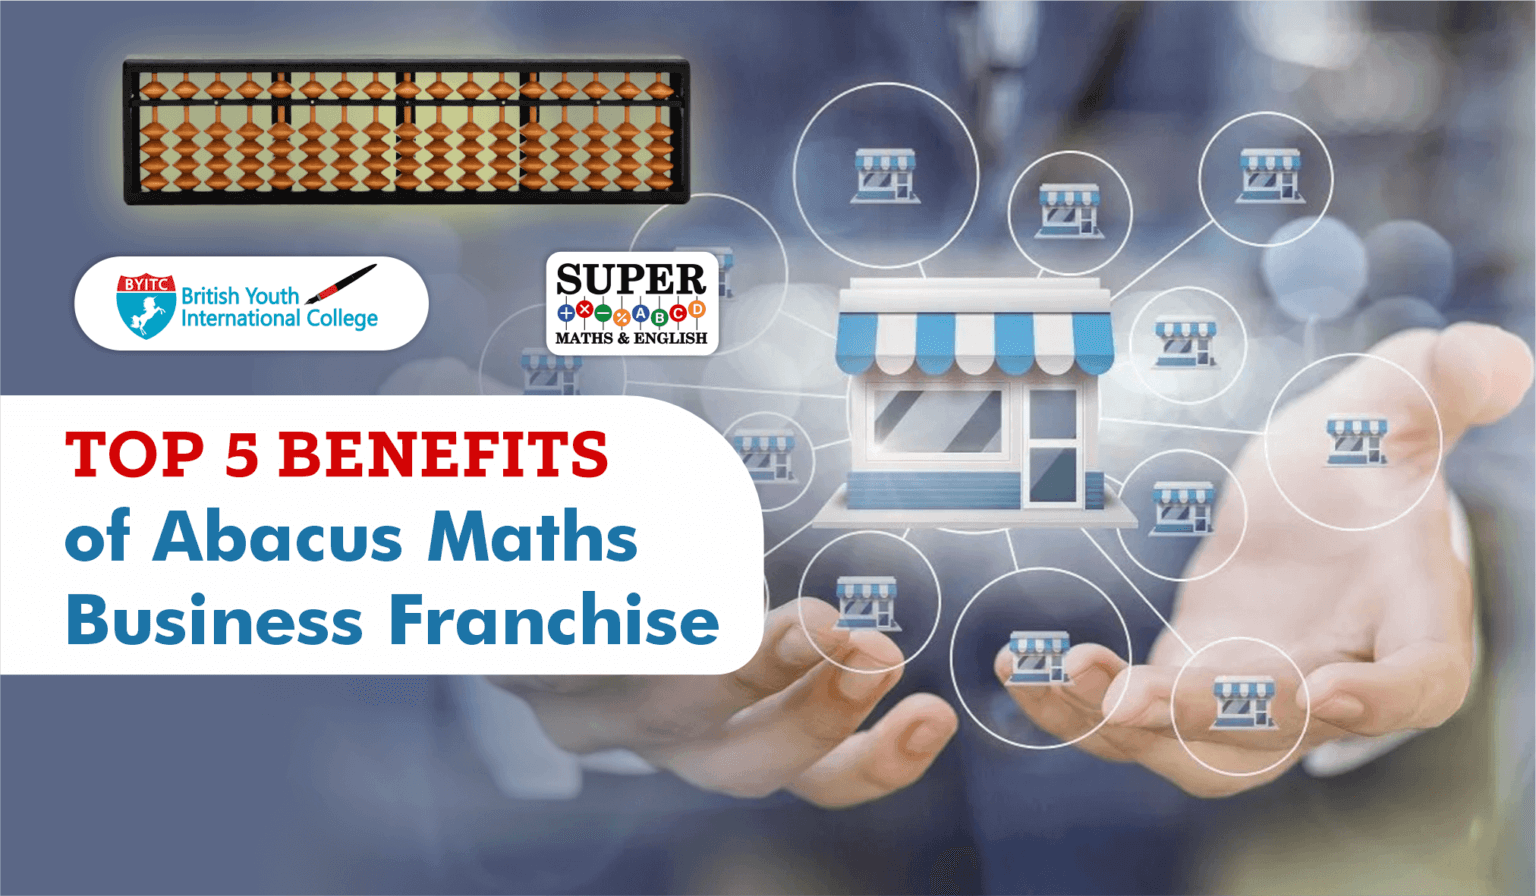 Top 5 Benefits of Abacus Maths Business Franchise